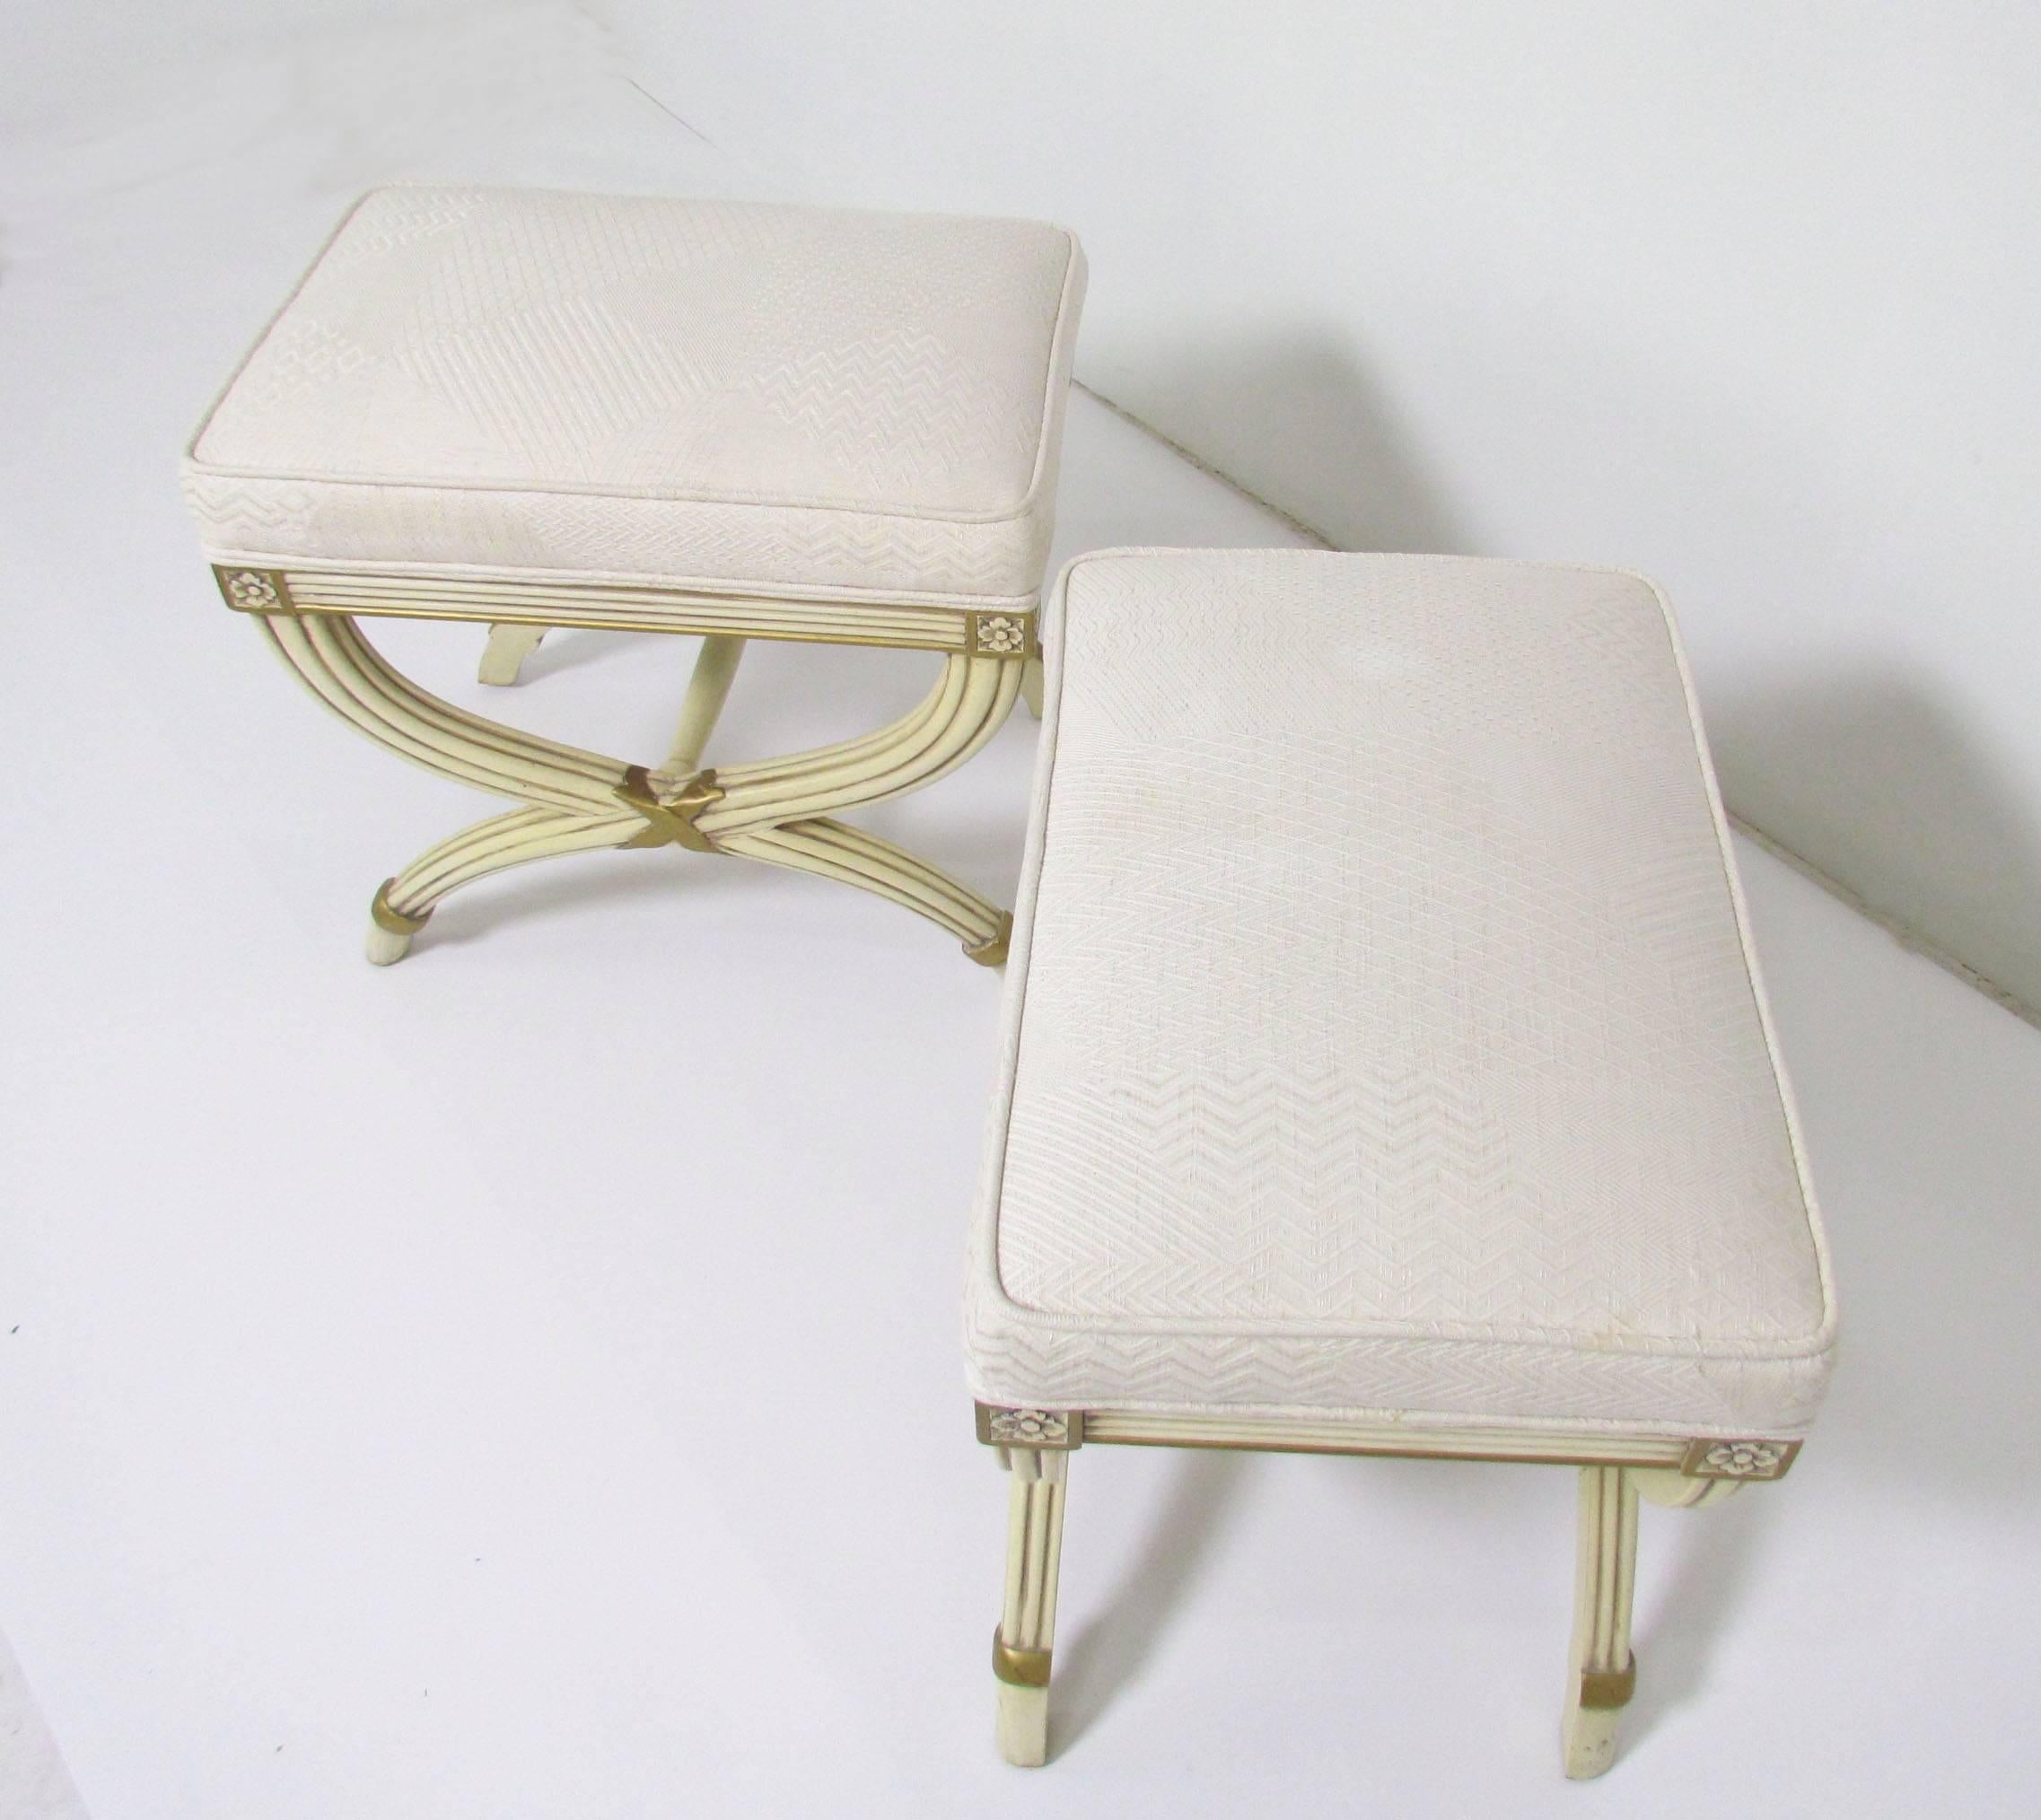 Upholstery Pair of Hollywood Regency Style X-Base Stools by Karges Furniture